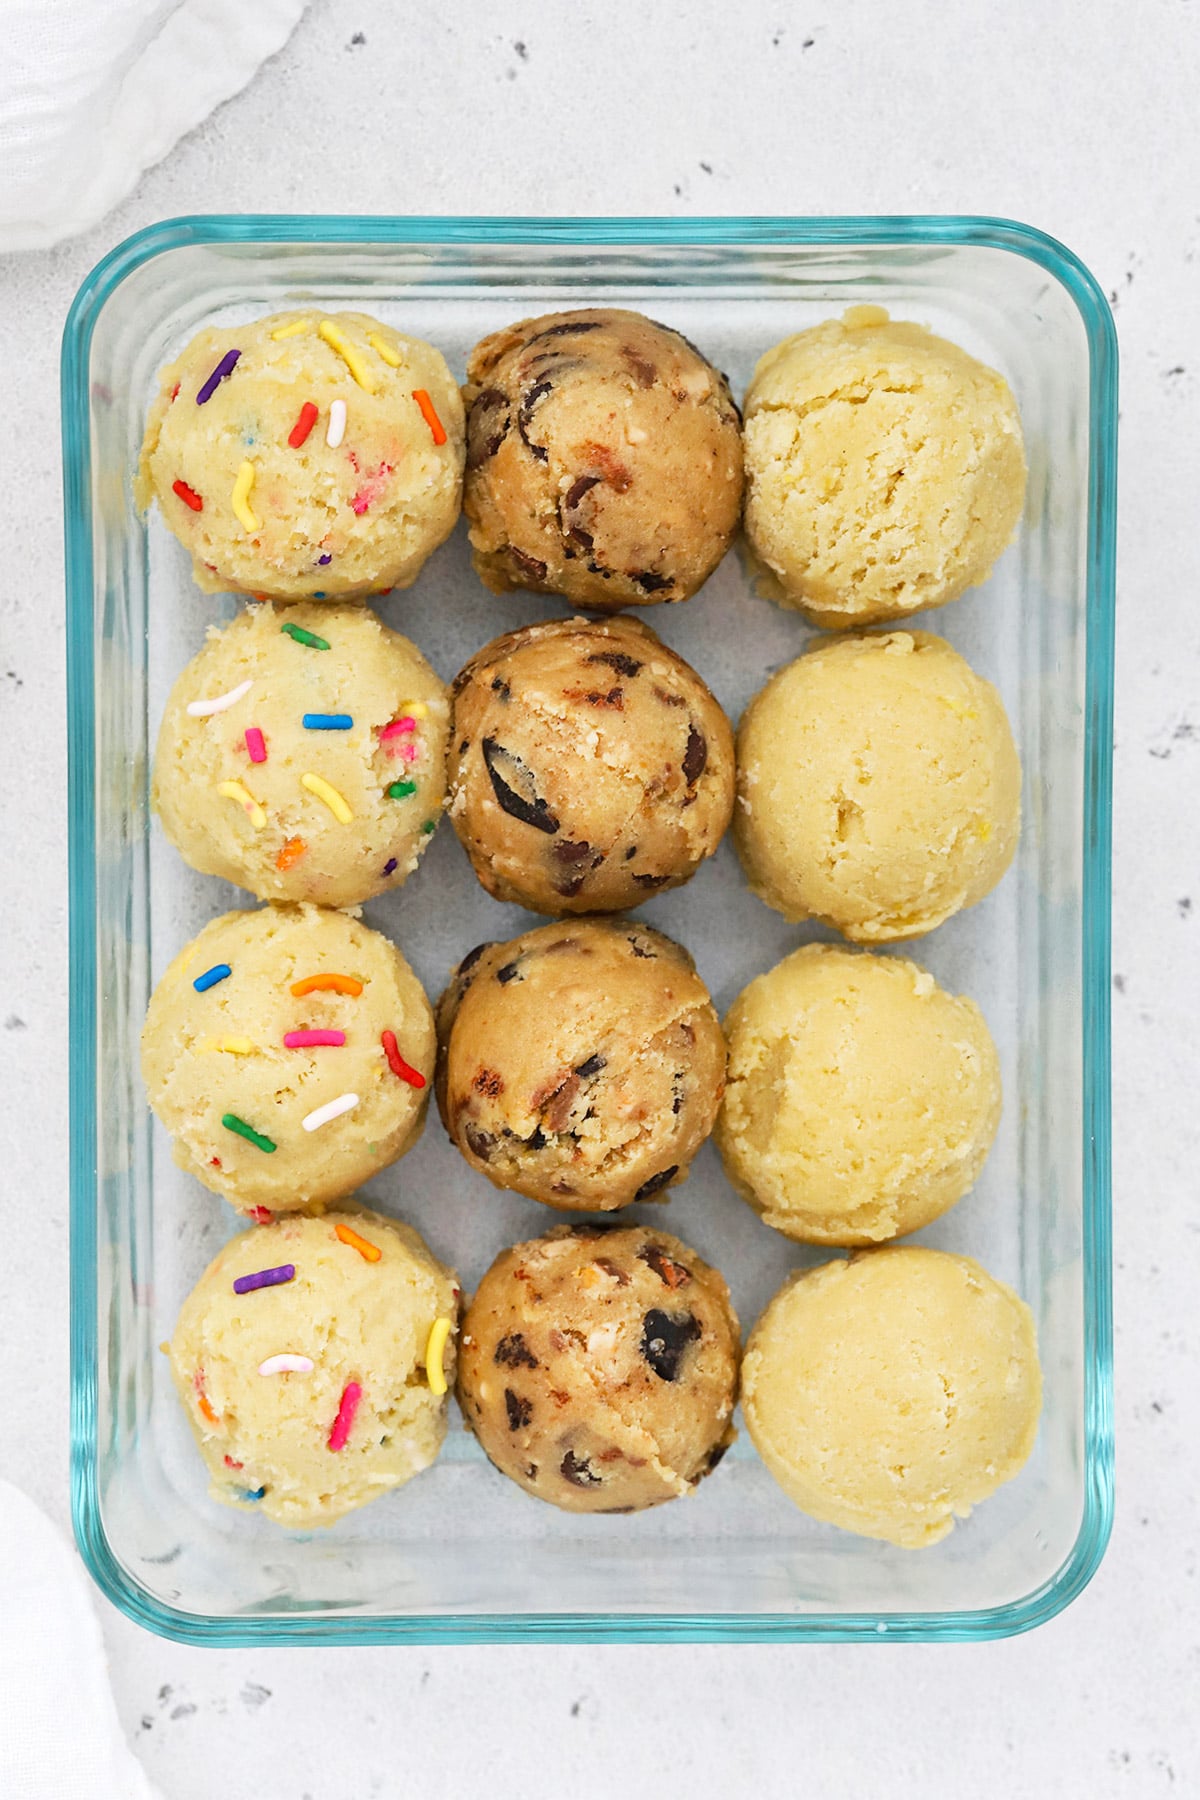 How To Freeze Cookie Dough & Bake From Frozen